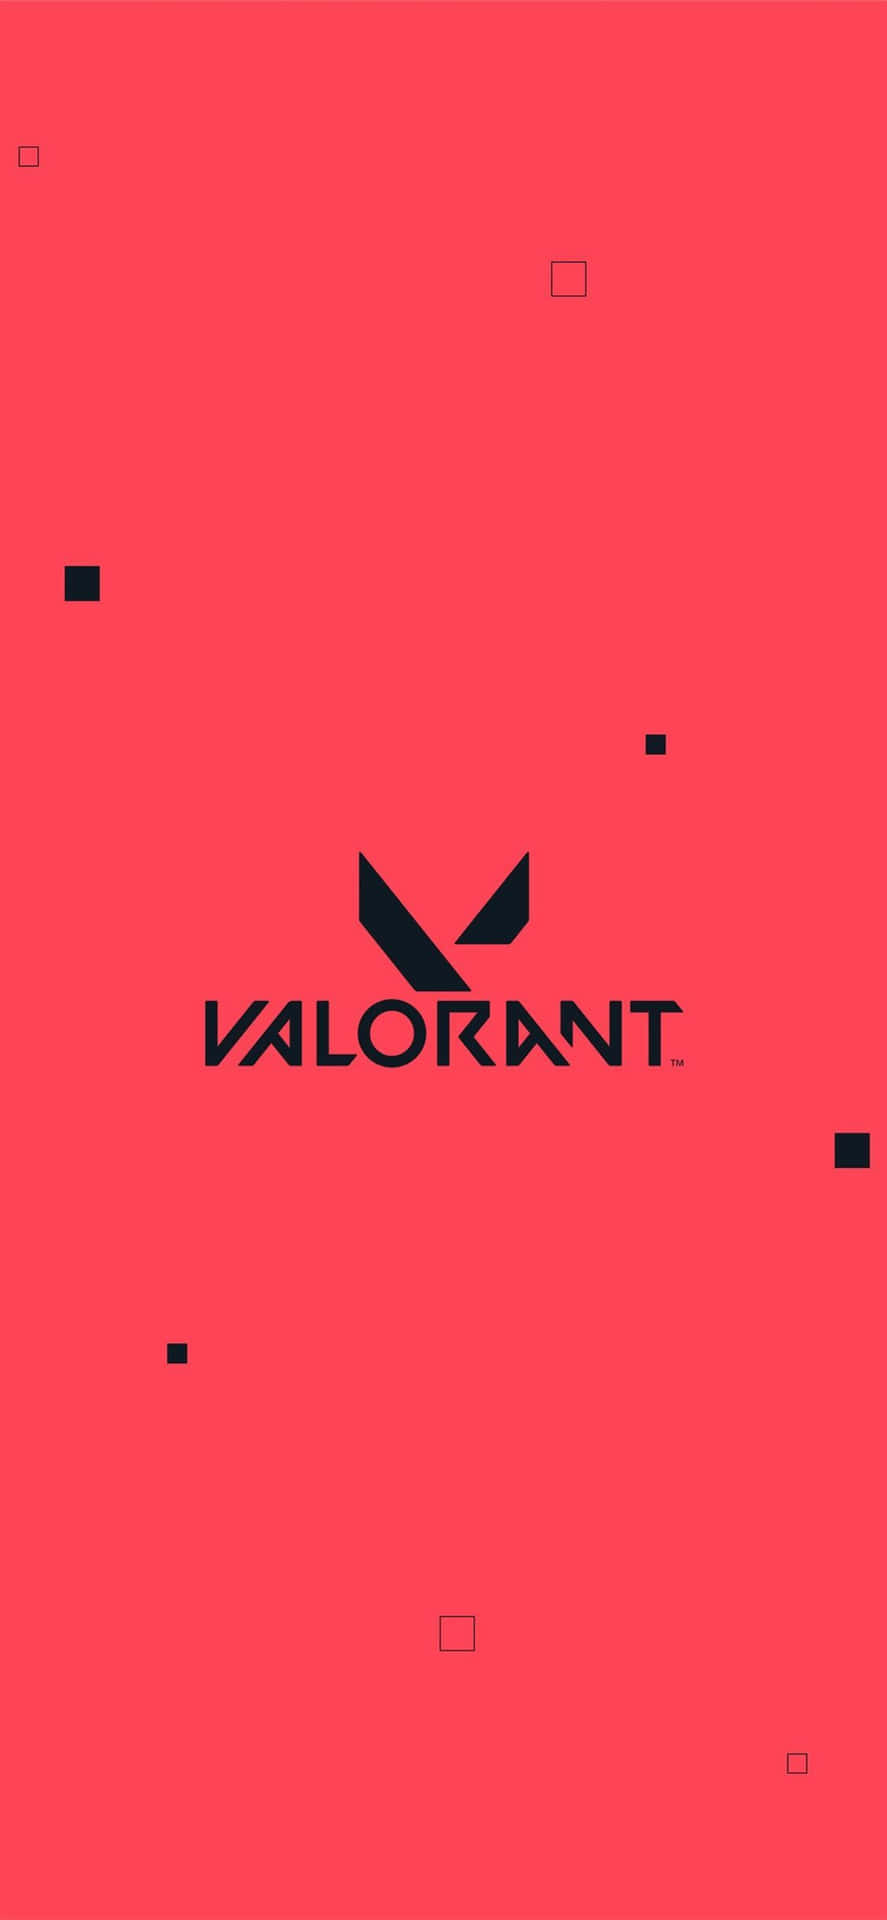 Experience Valorant on your Iphone x